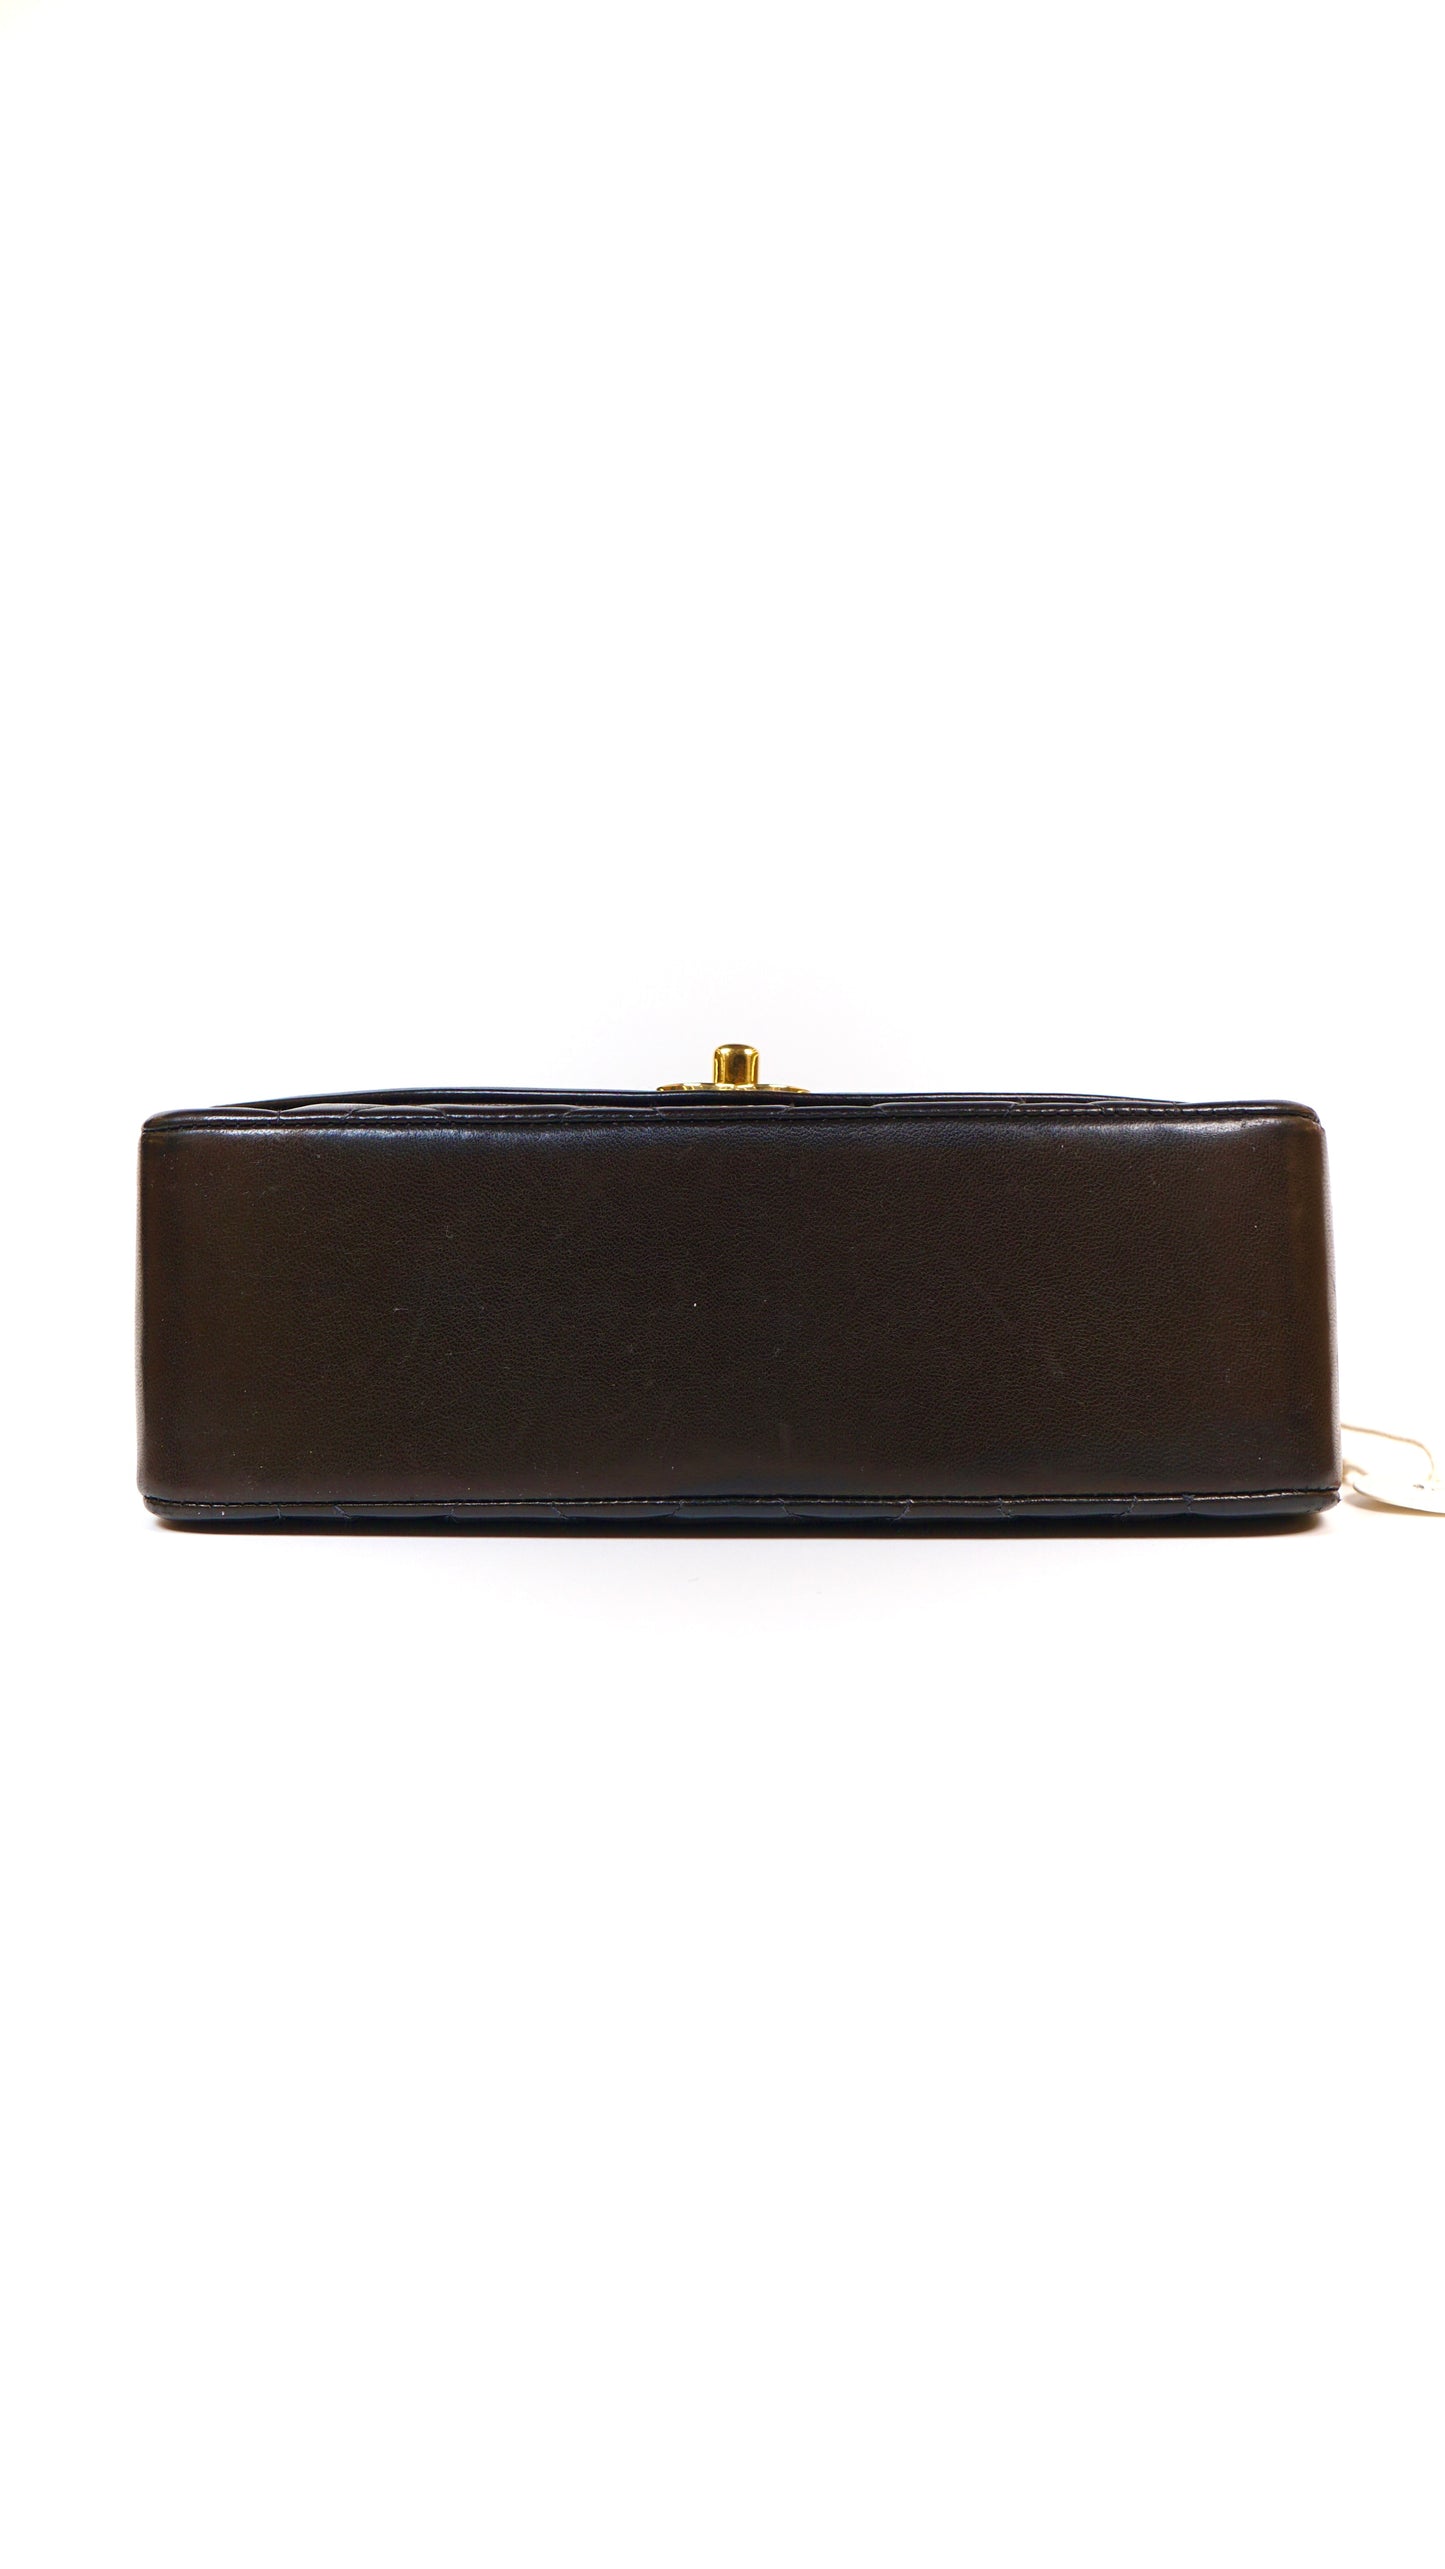 RM, 2 series small black lambskin diana with seal and card